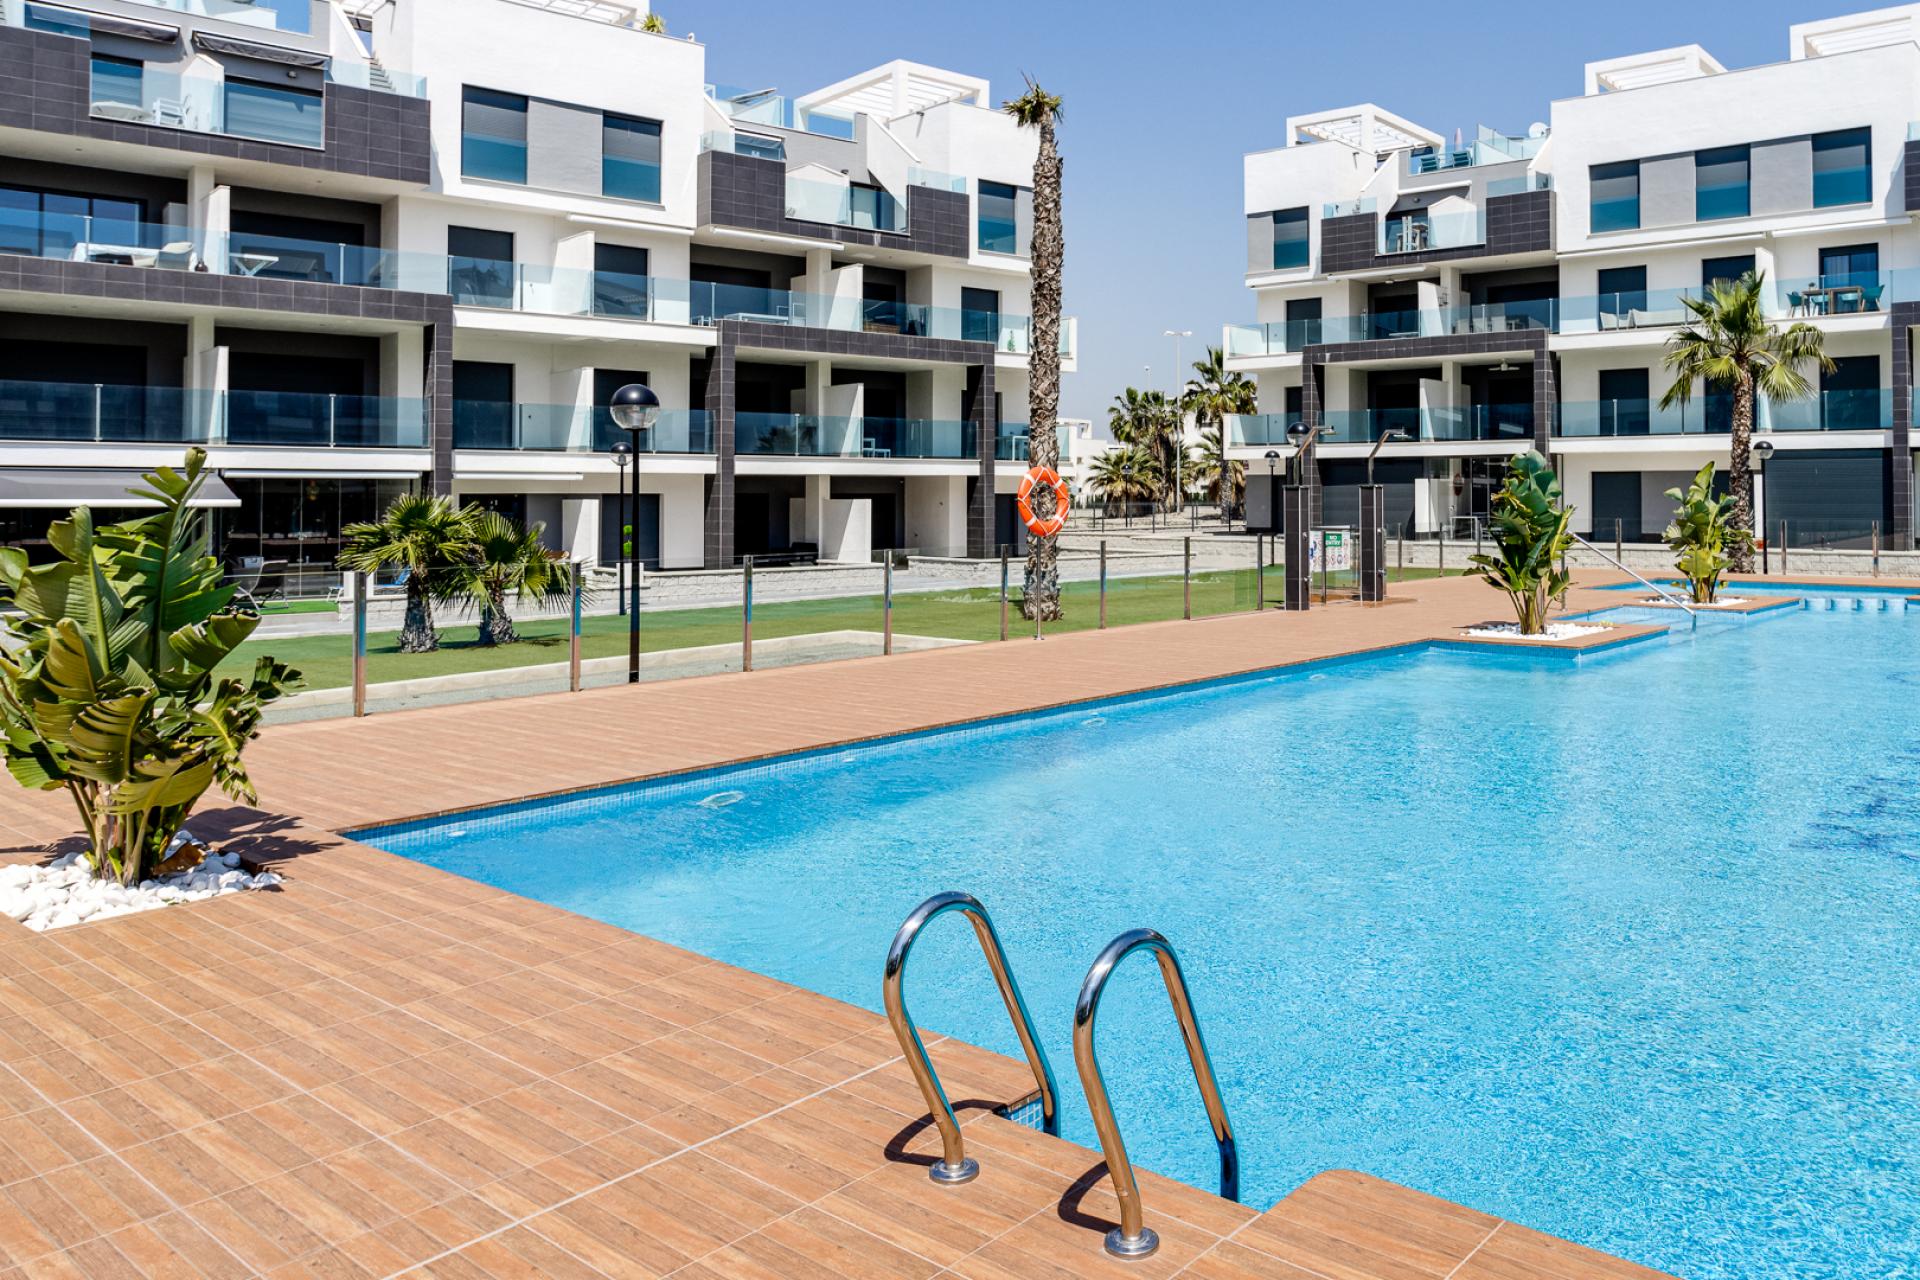 A vendre appartements Oasis Beach XIV: nouvelle phase in Medvilla Spanje